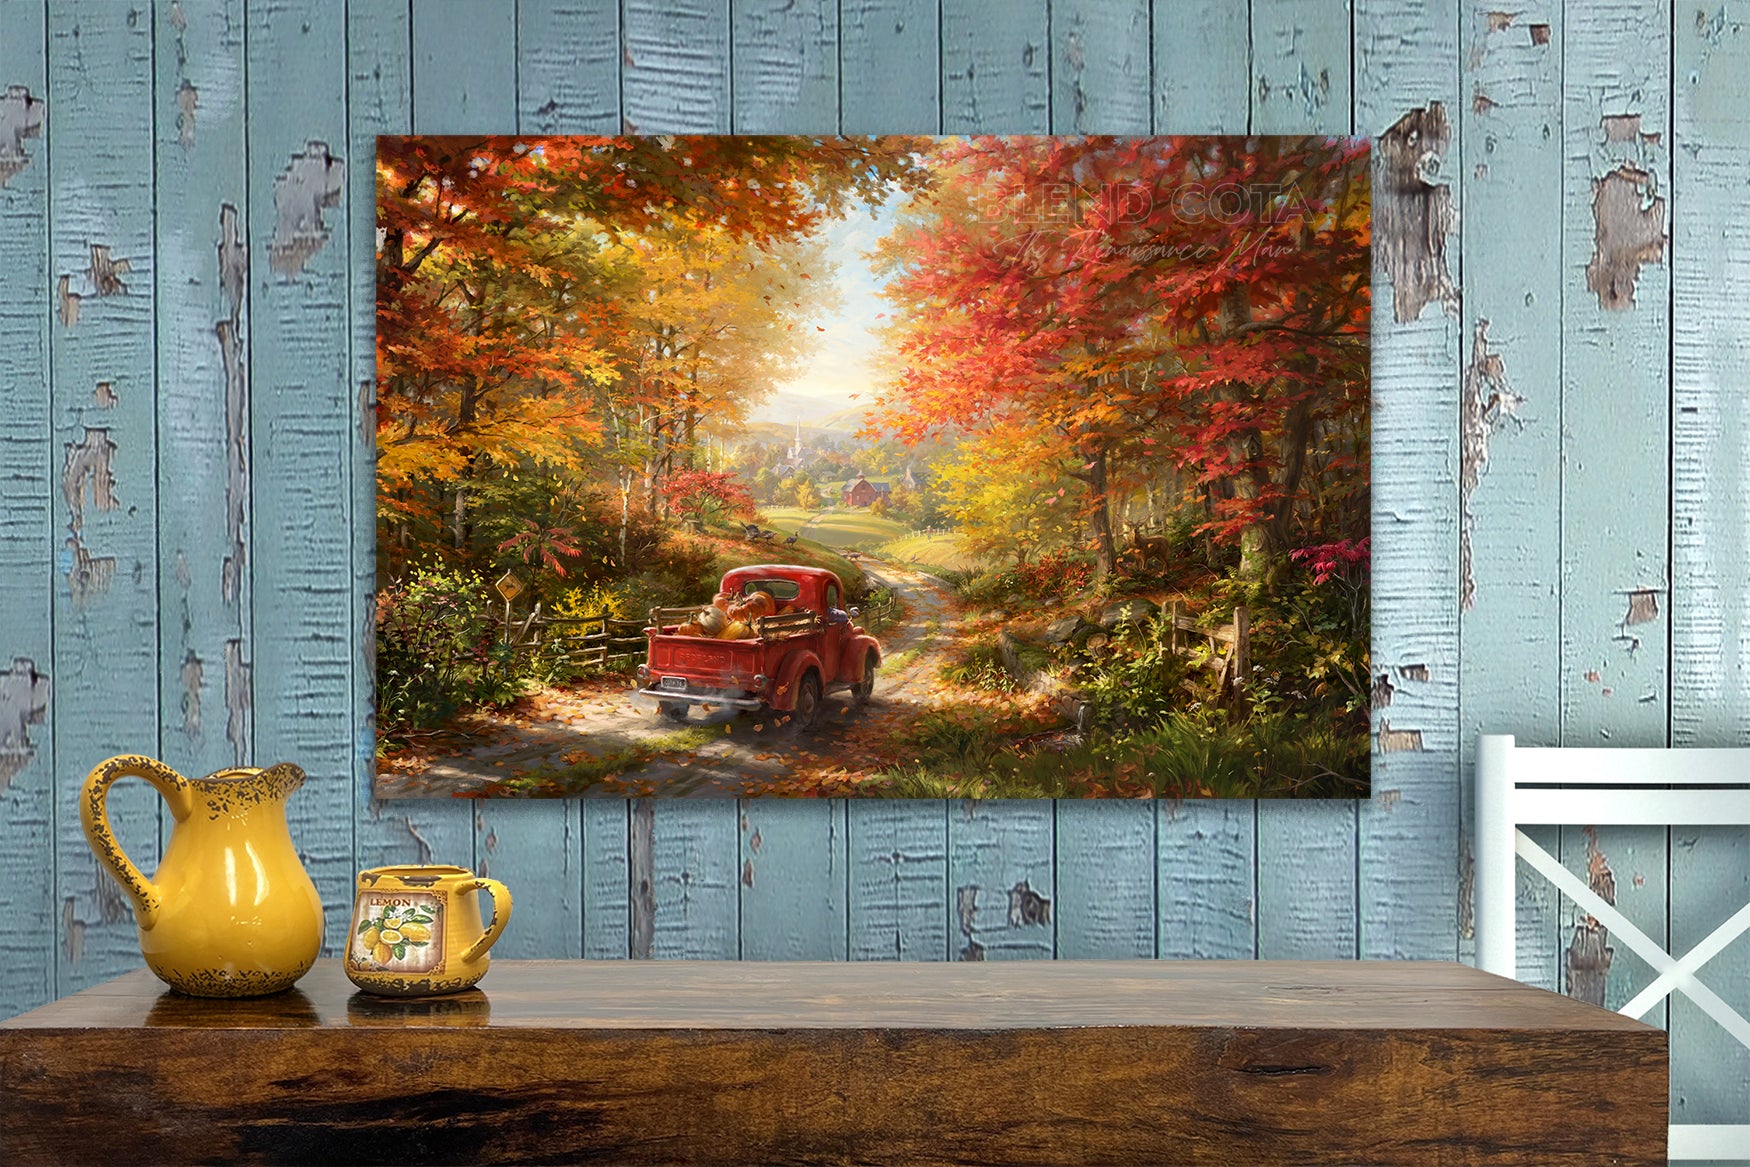 The Place I Belong | Fall Road Autumn Leaves - Blend Cota Limited Edition Art on Metal - Blend Cota Studios - room setting with painting hanging on blue wooden panel wall